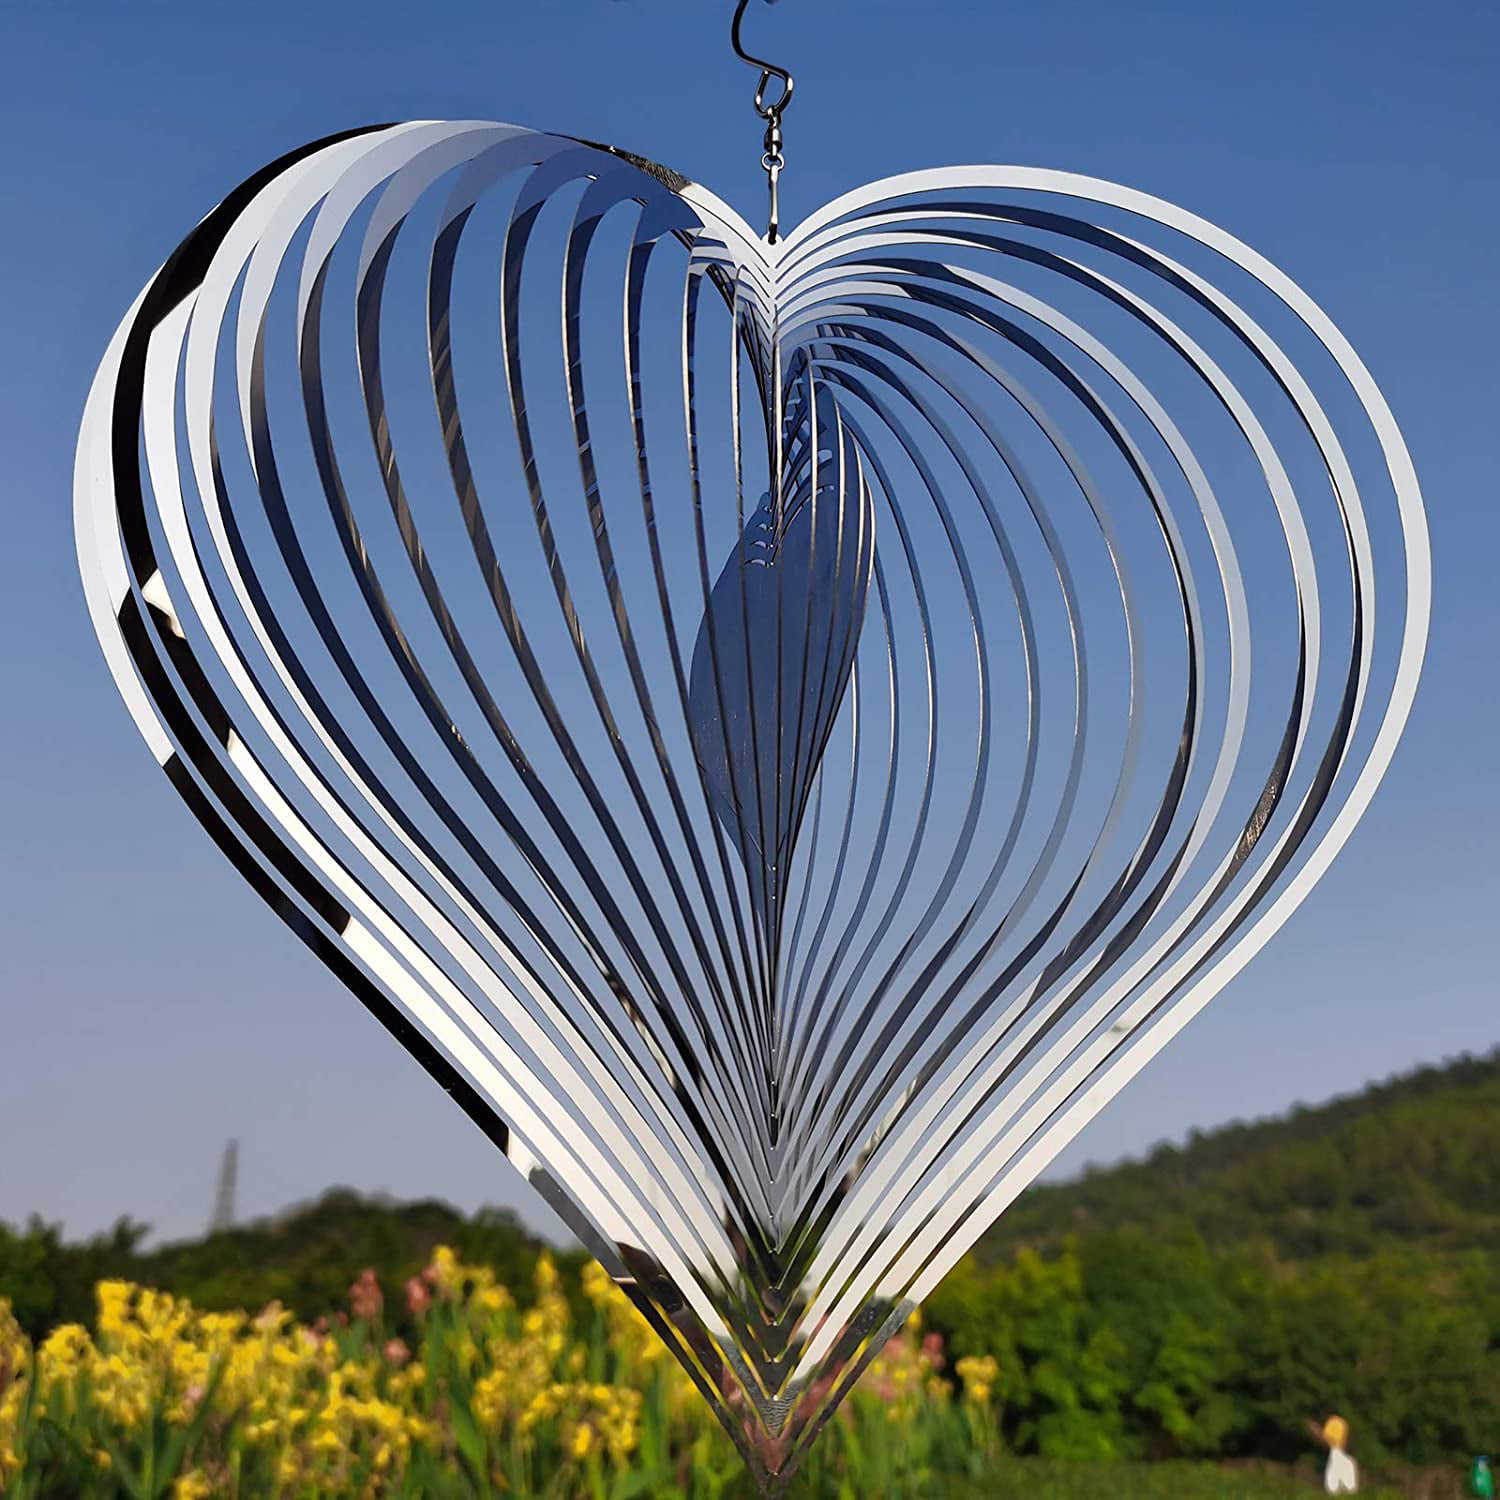 3D Heart Wind Spinner Stainless Steel Hanging Wind Chime Yard Garden Patio Decor 